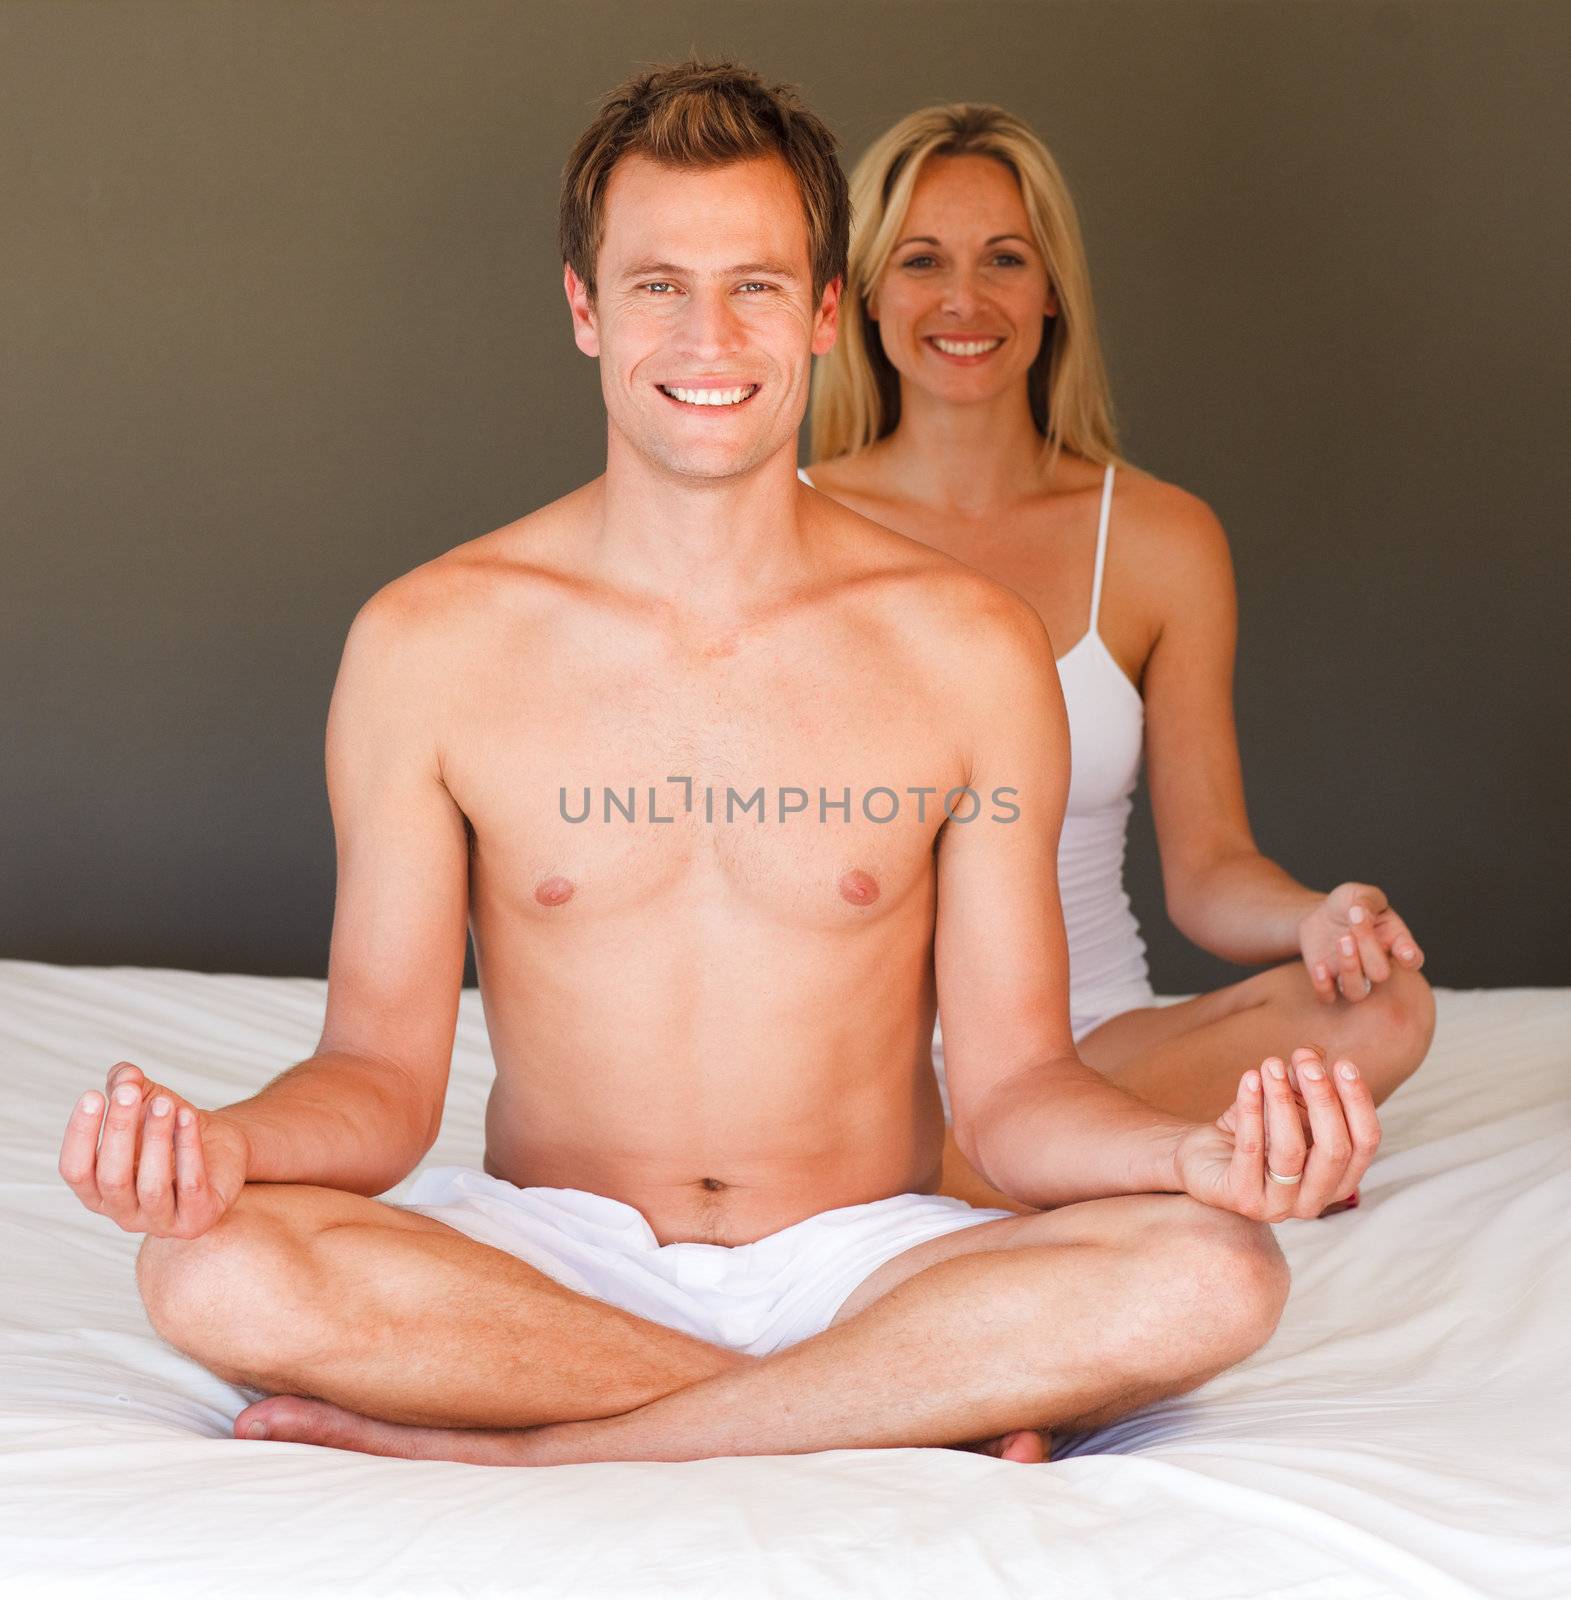 Smiling couple doing exercises on bed by Wavebreakmedia